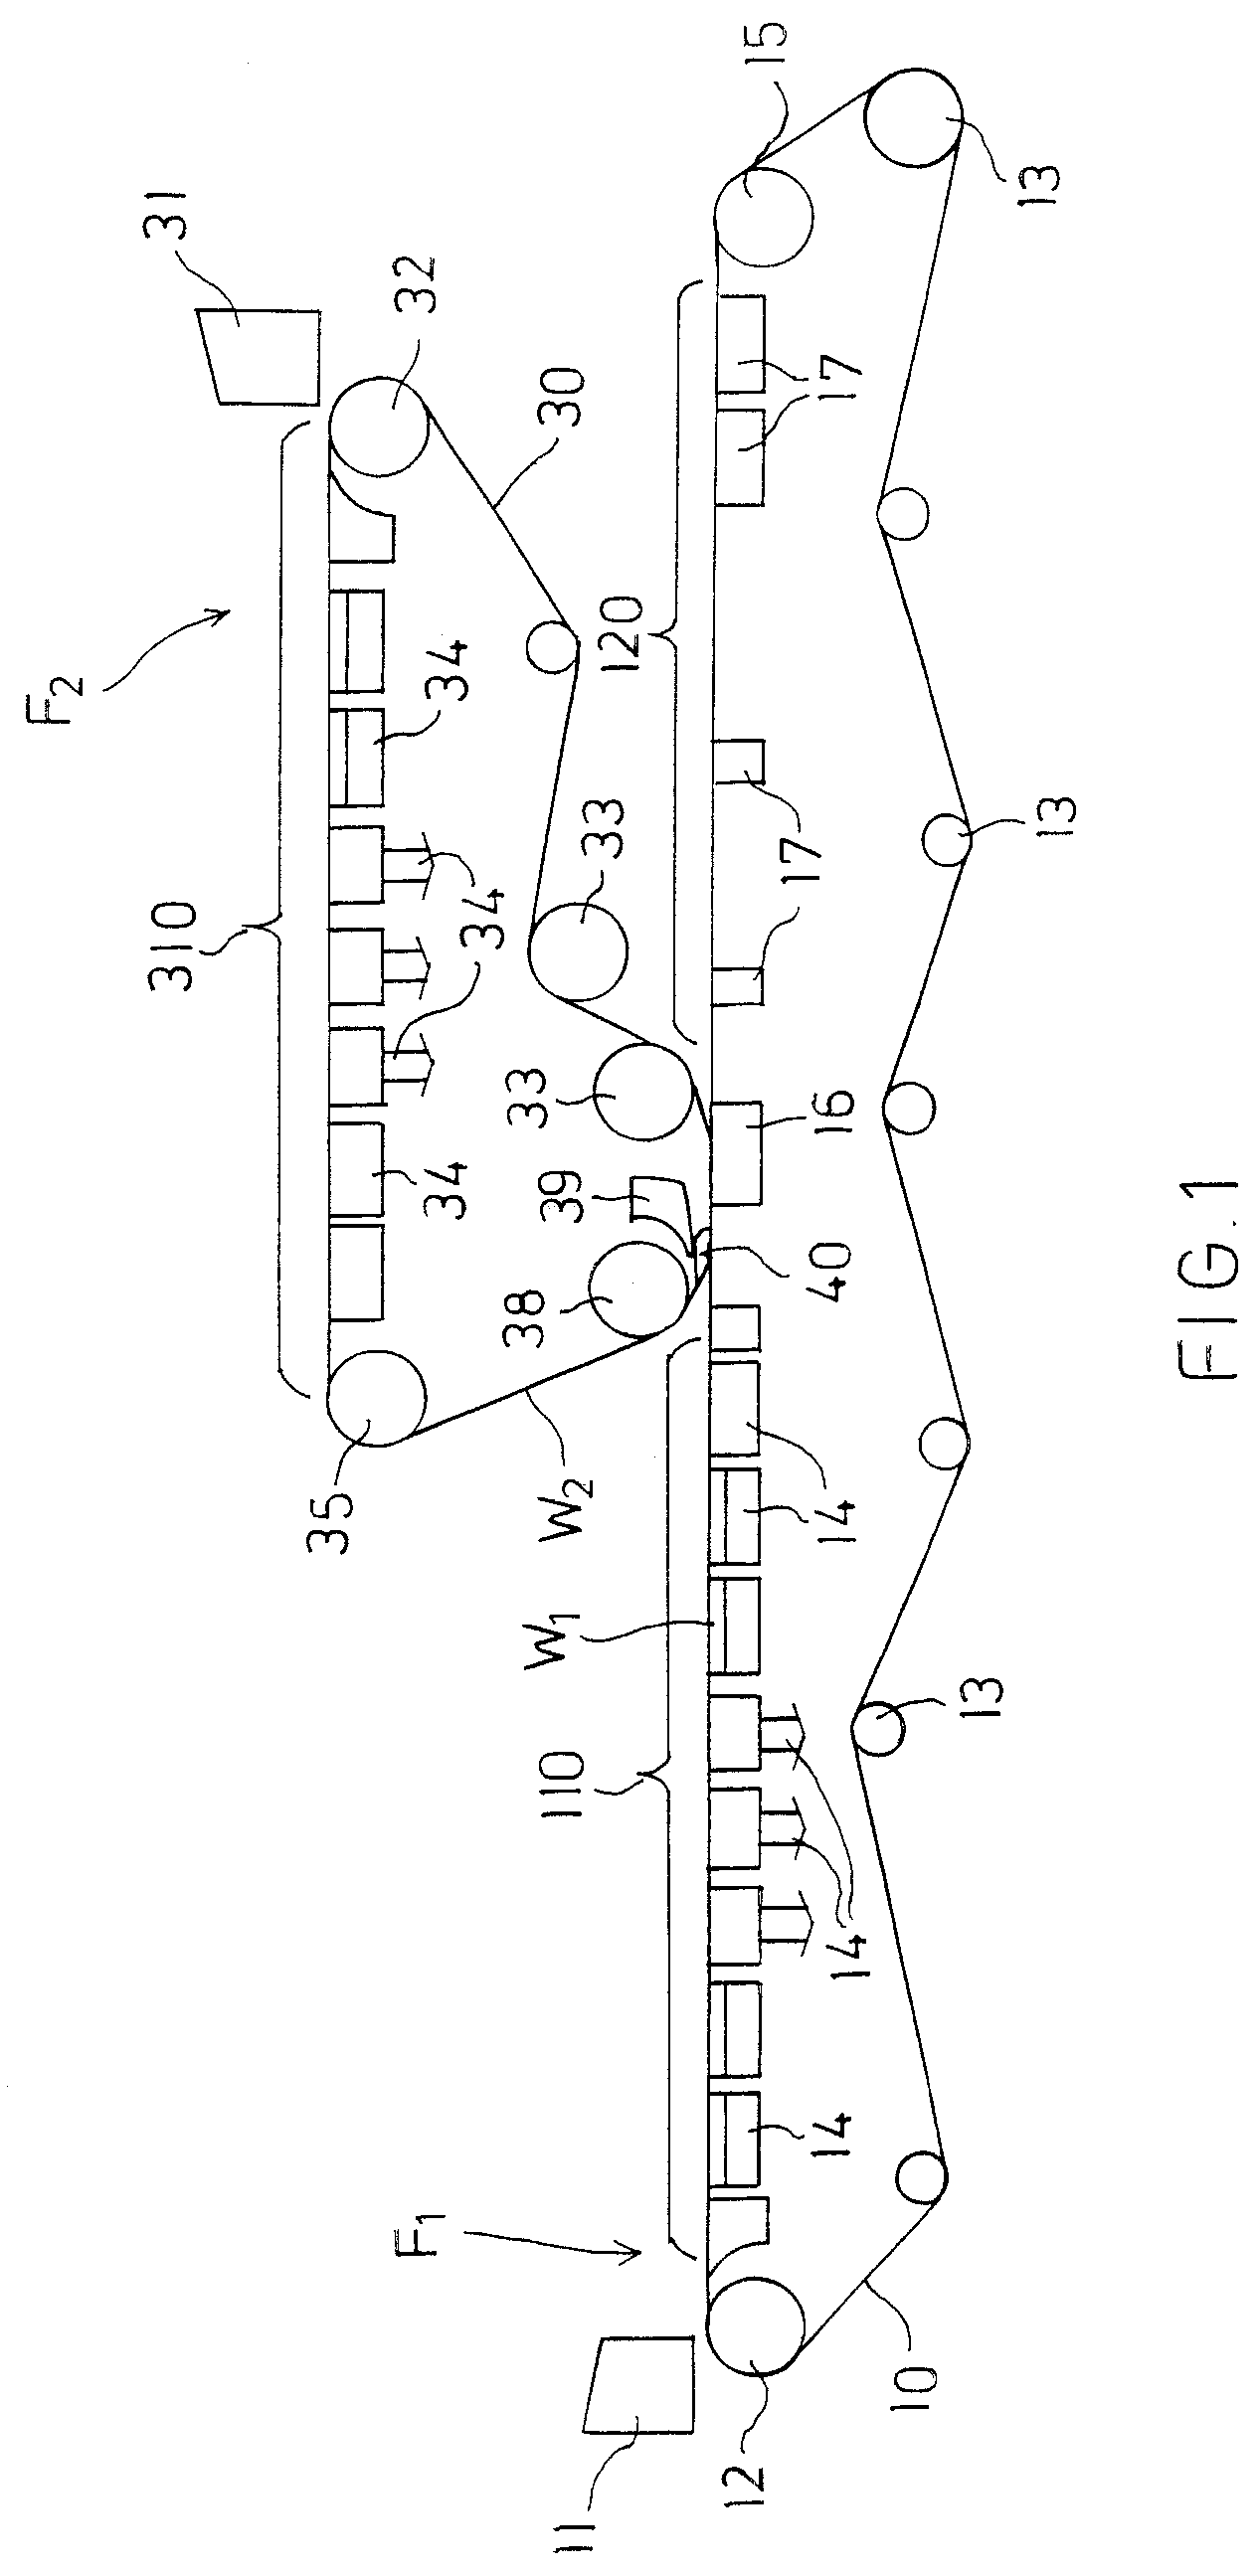 Web-forming section and method for manufacturing multi-layer web